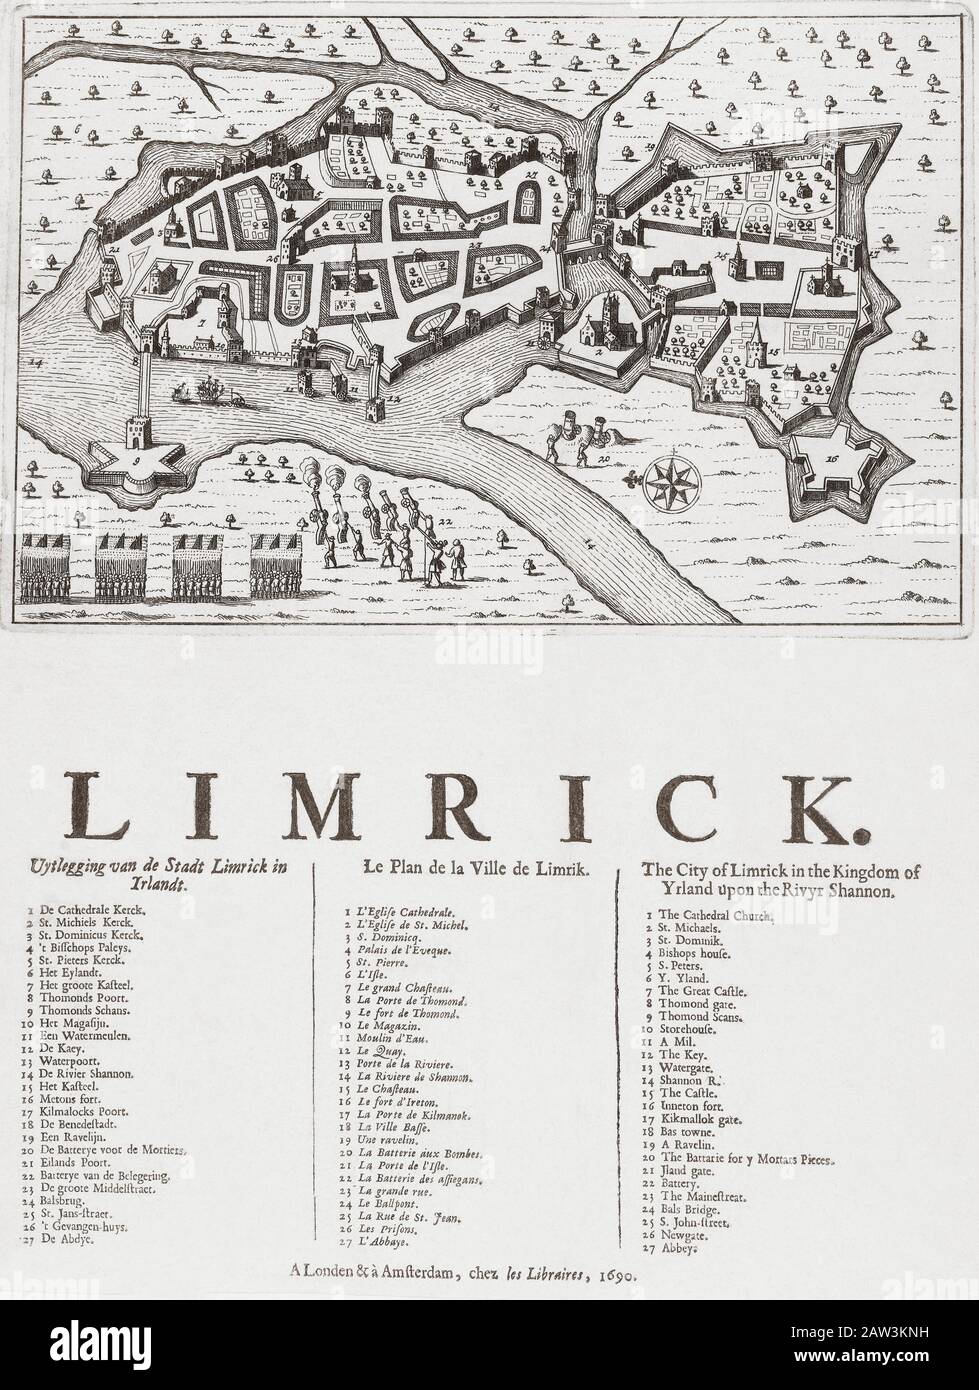 Map of Limerick, Ireland, dating from 1690 and showing the forces of William III besieging the city during the Williamite War of 1689 - 1691. Stock Photo